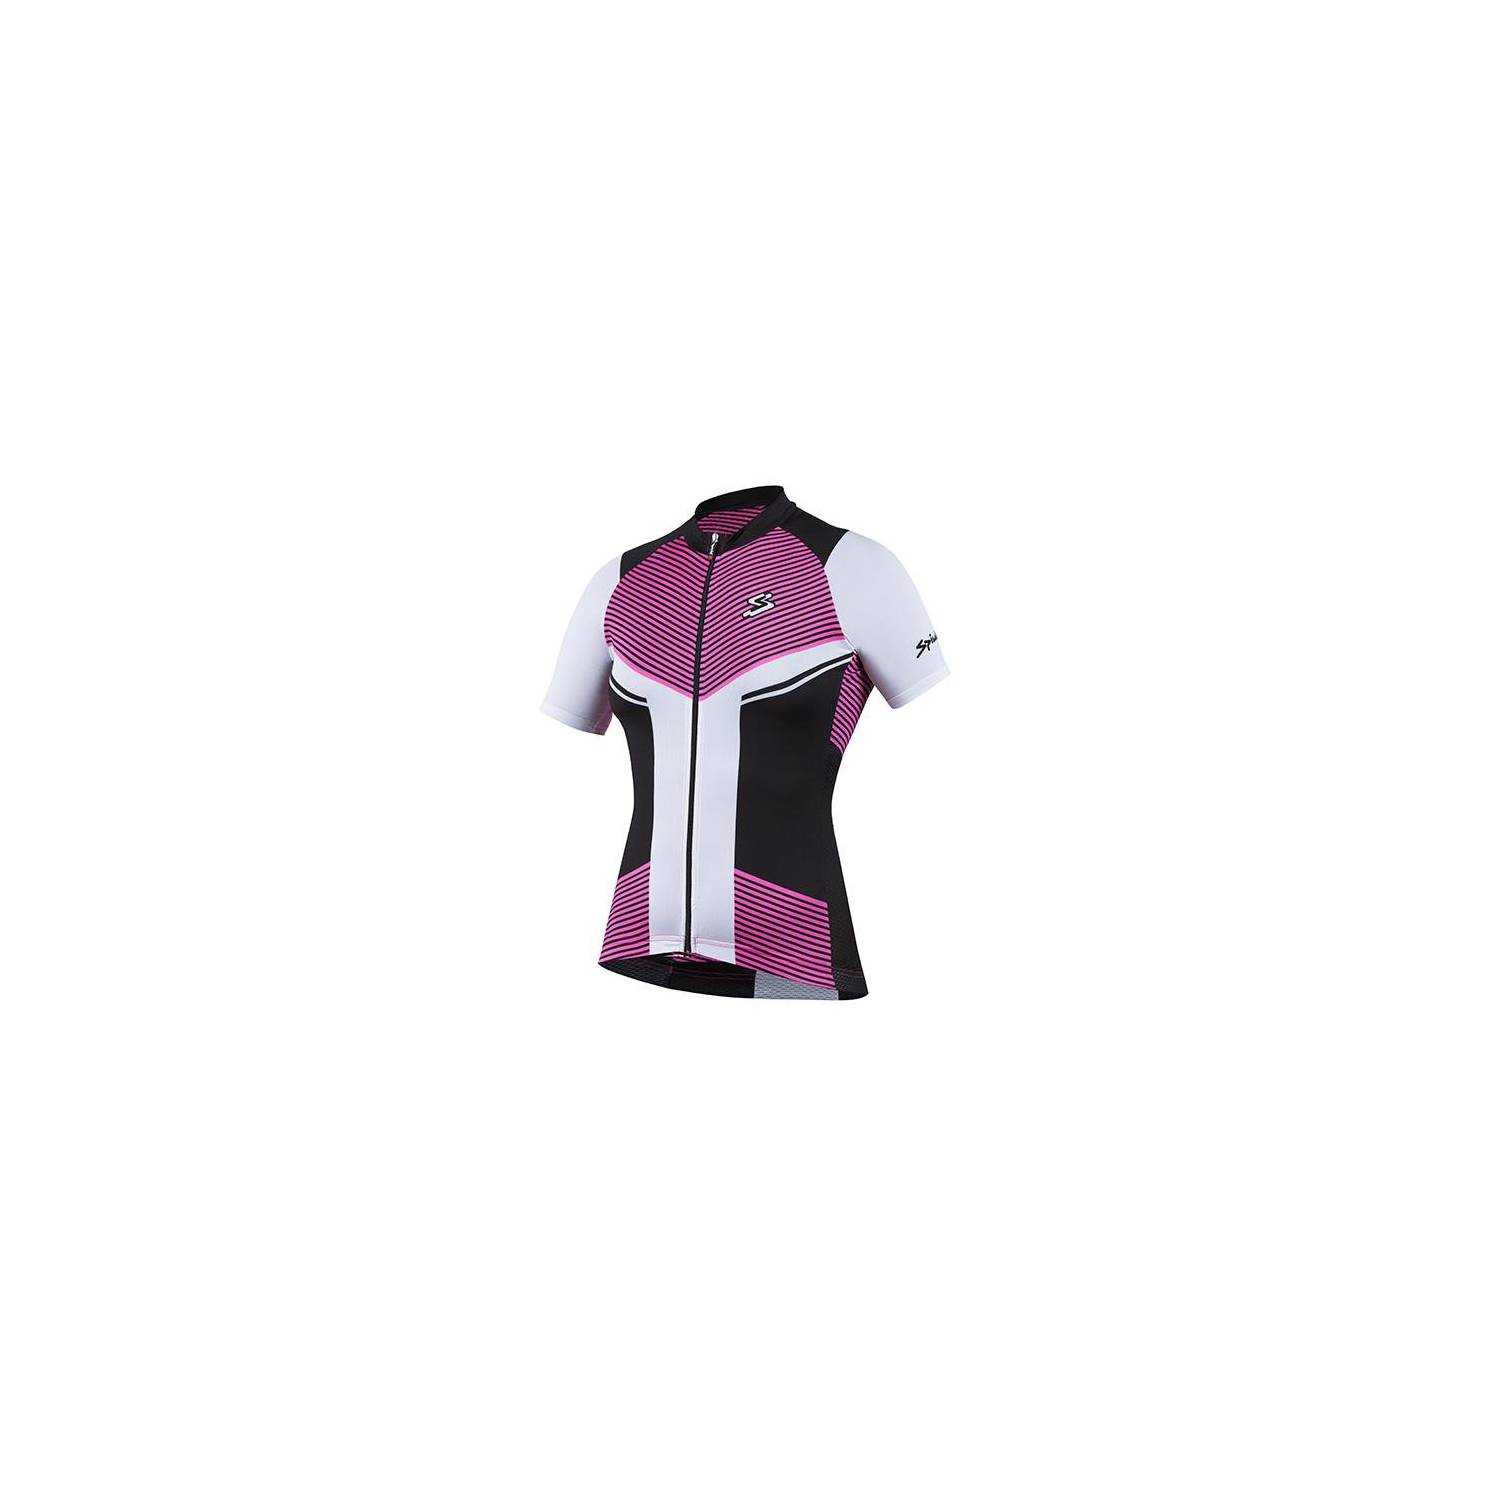 Chaqueta ciclismo Mujer SPIUK Performance